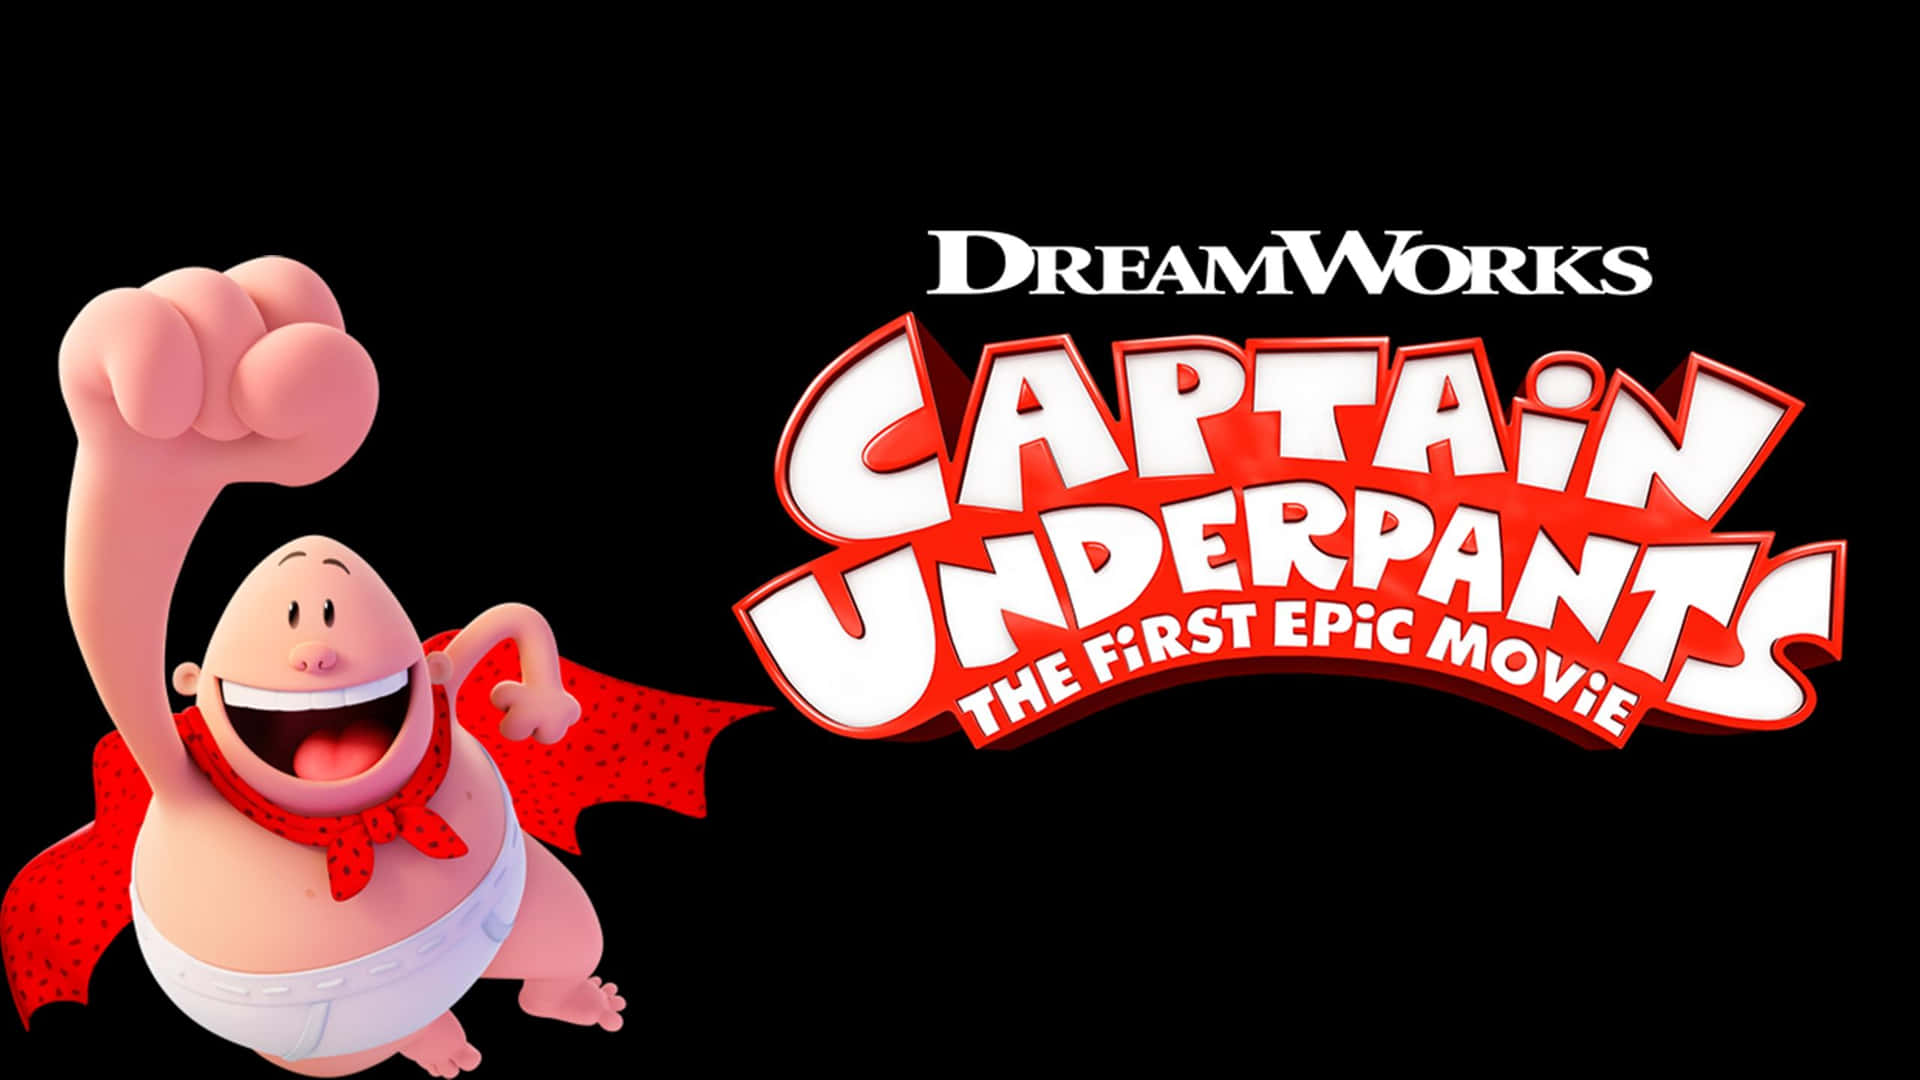 Captain Underpants: The First Epic Movie: DreamWorks' Indie Animation